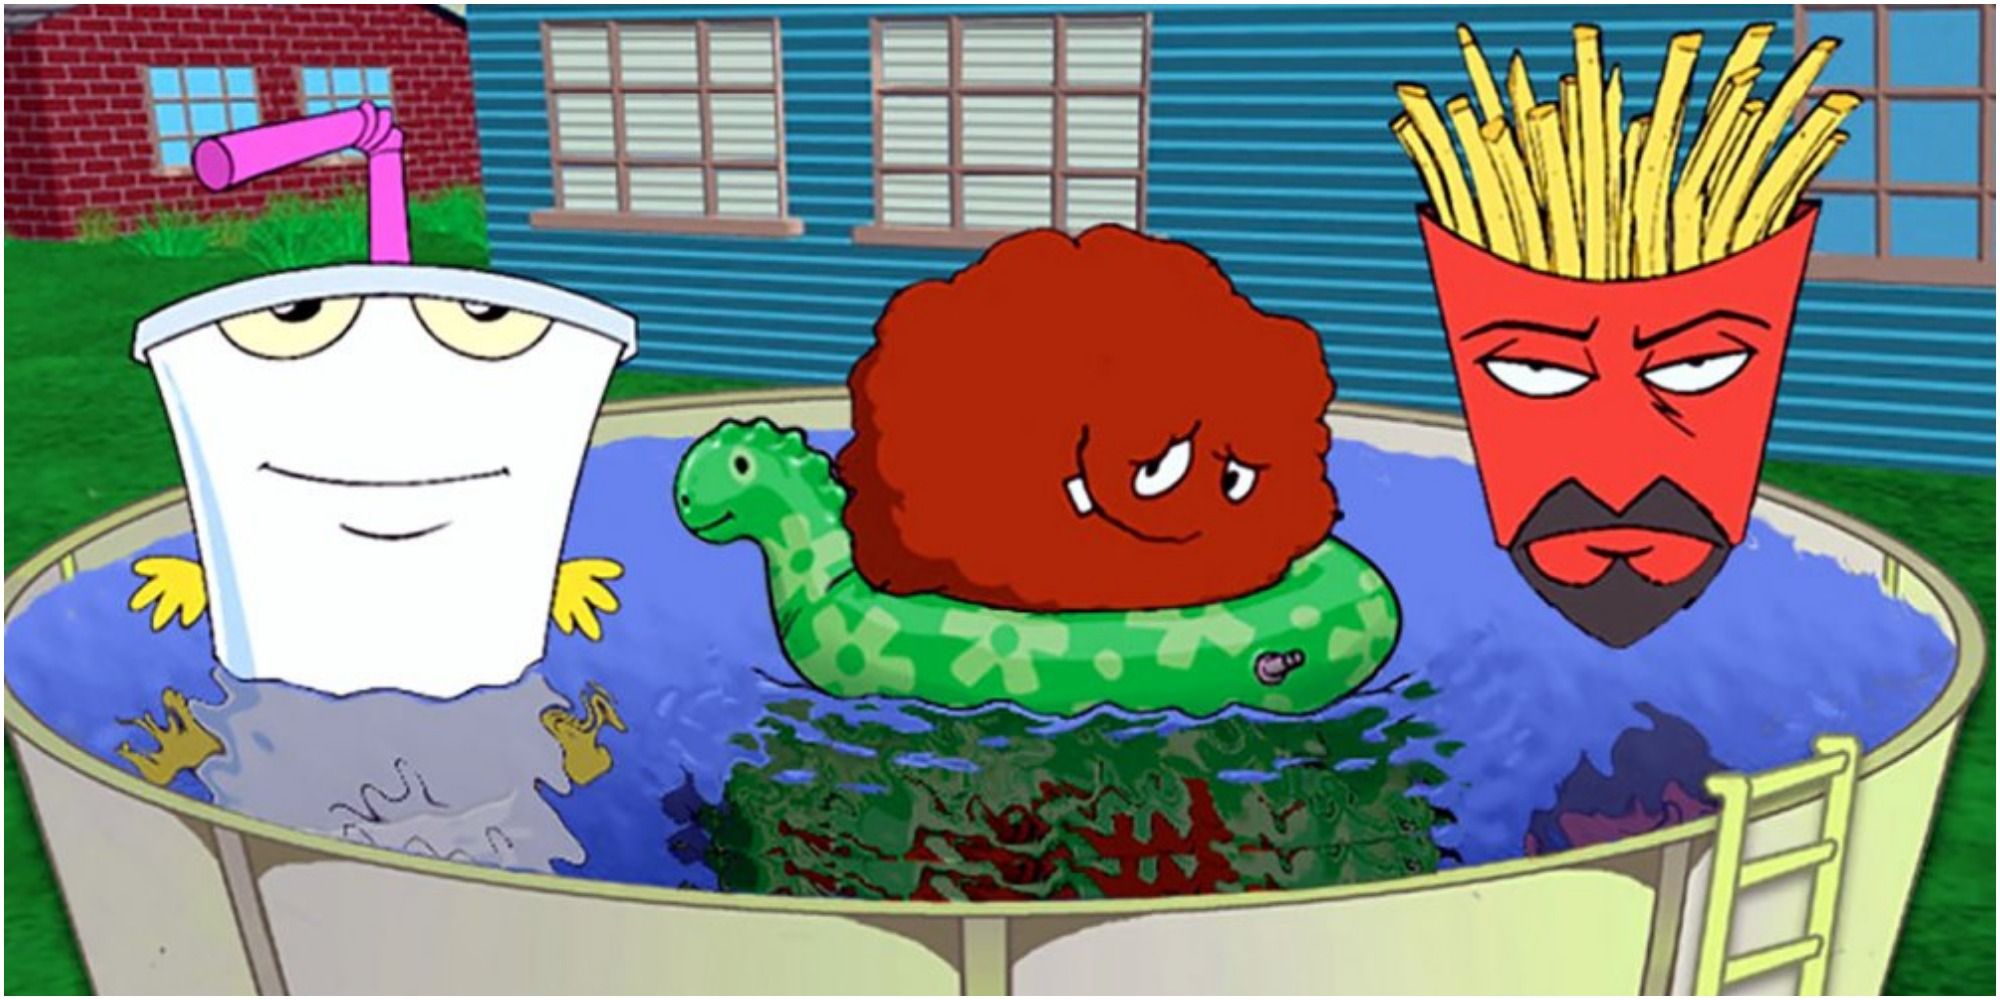 Top Ten Most Iconic Adult Swim Series of All Time